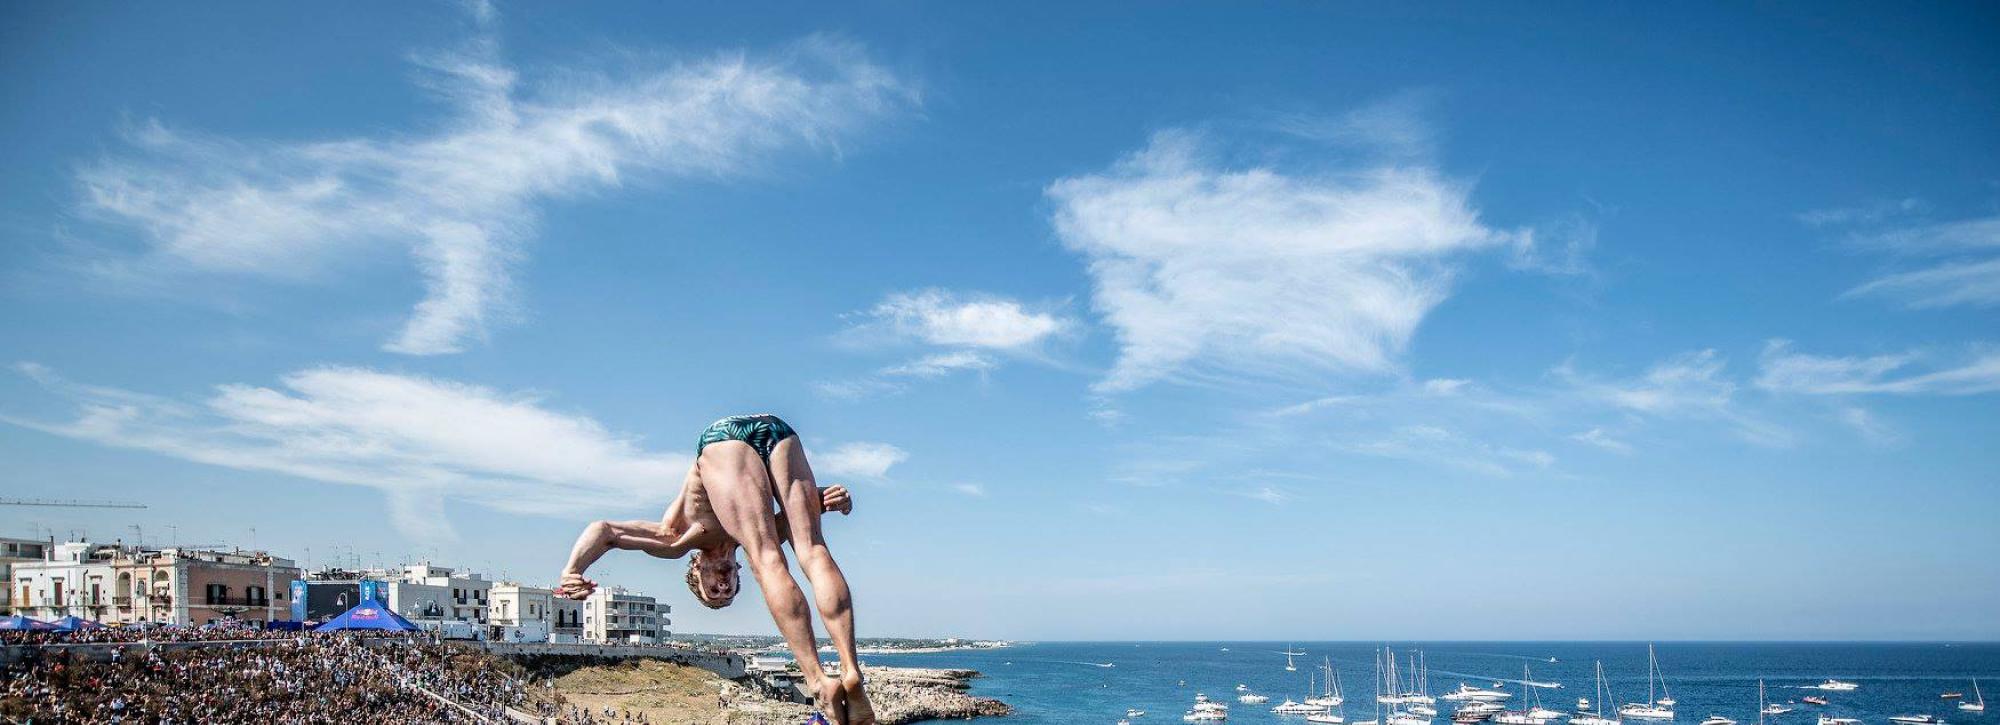 September 26 Red Bull Cliff Diving in Polignano a Mare